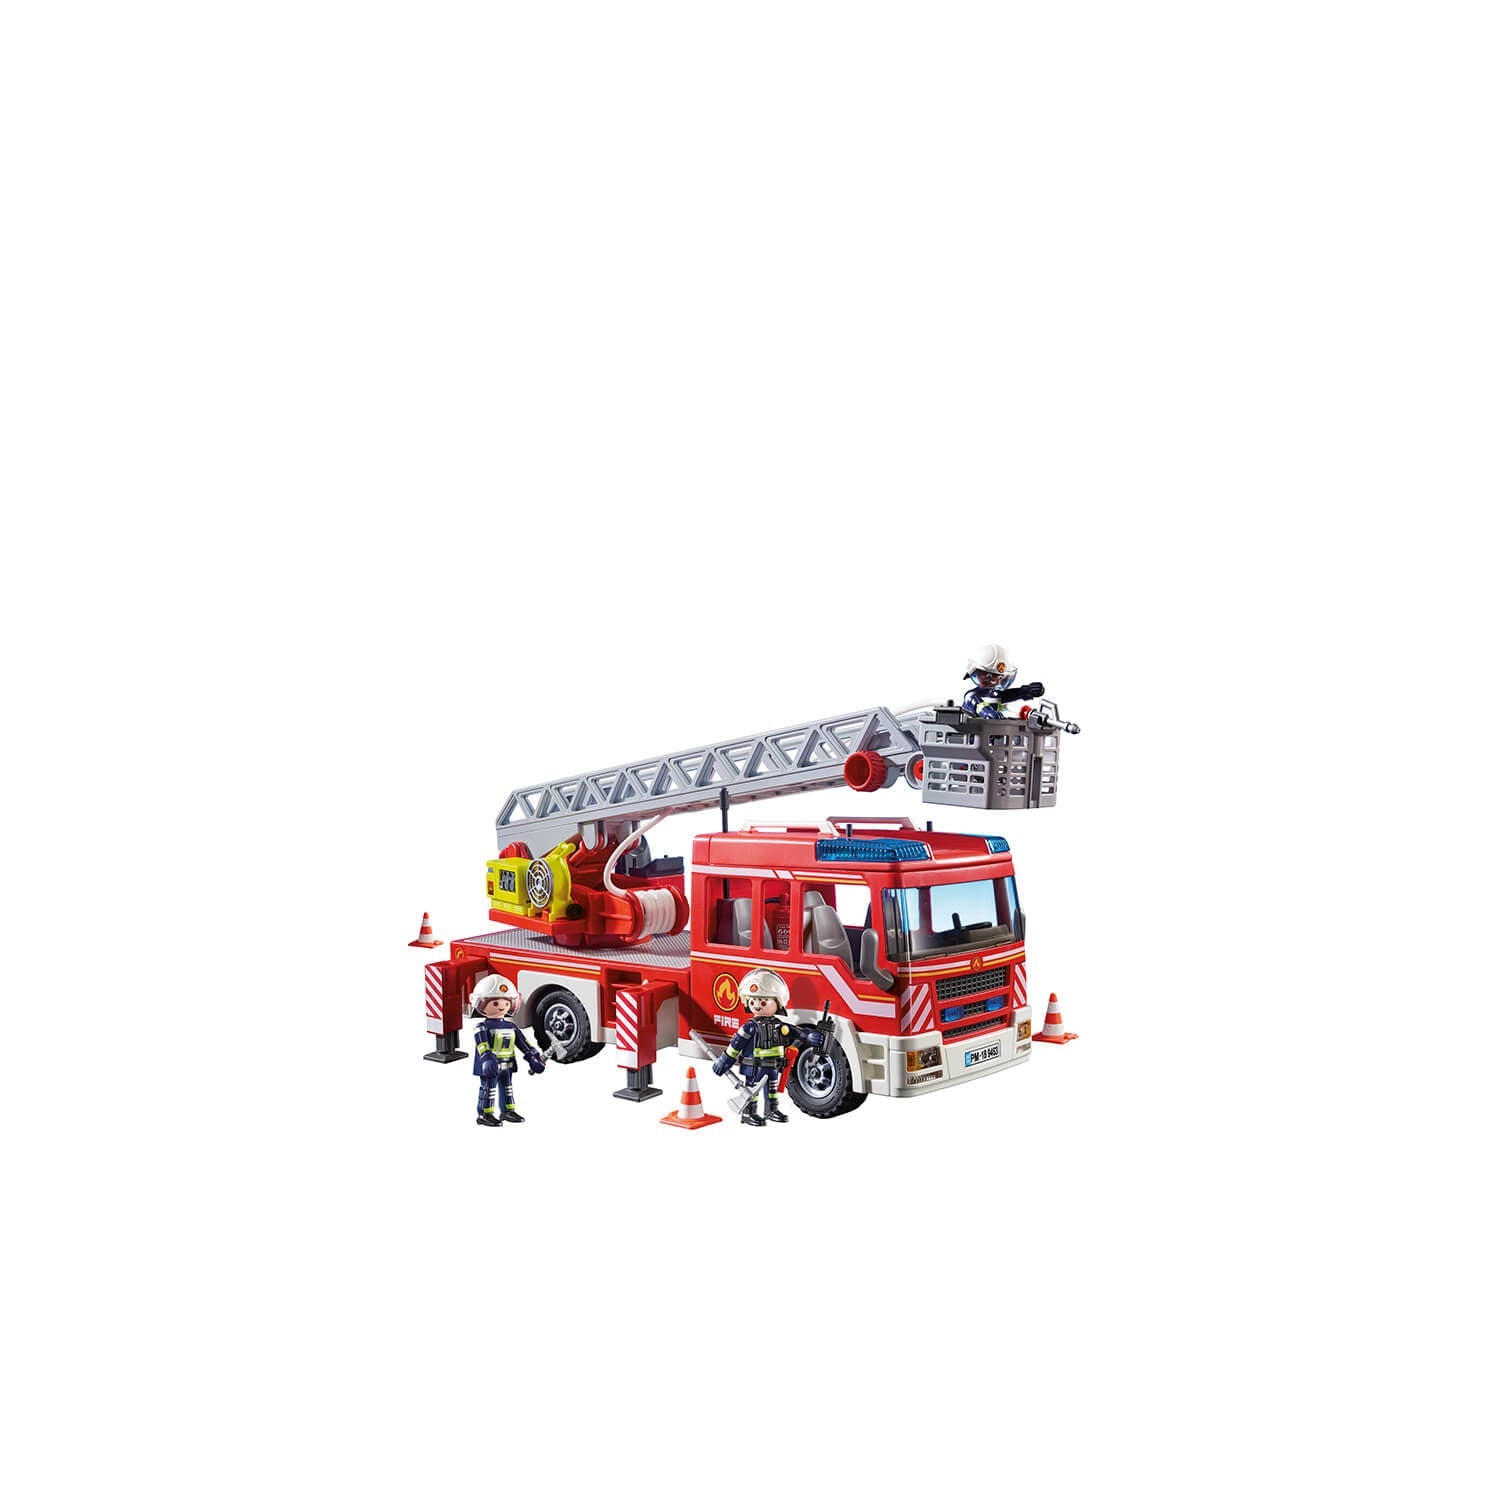 Playmobil Fire Rescue Truck : Target